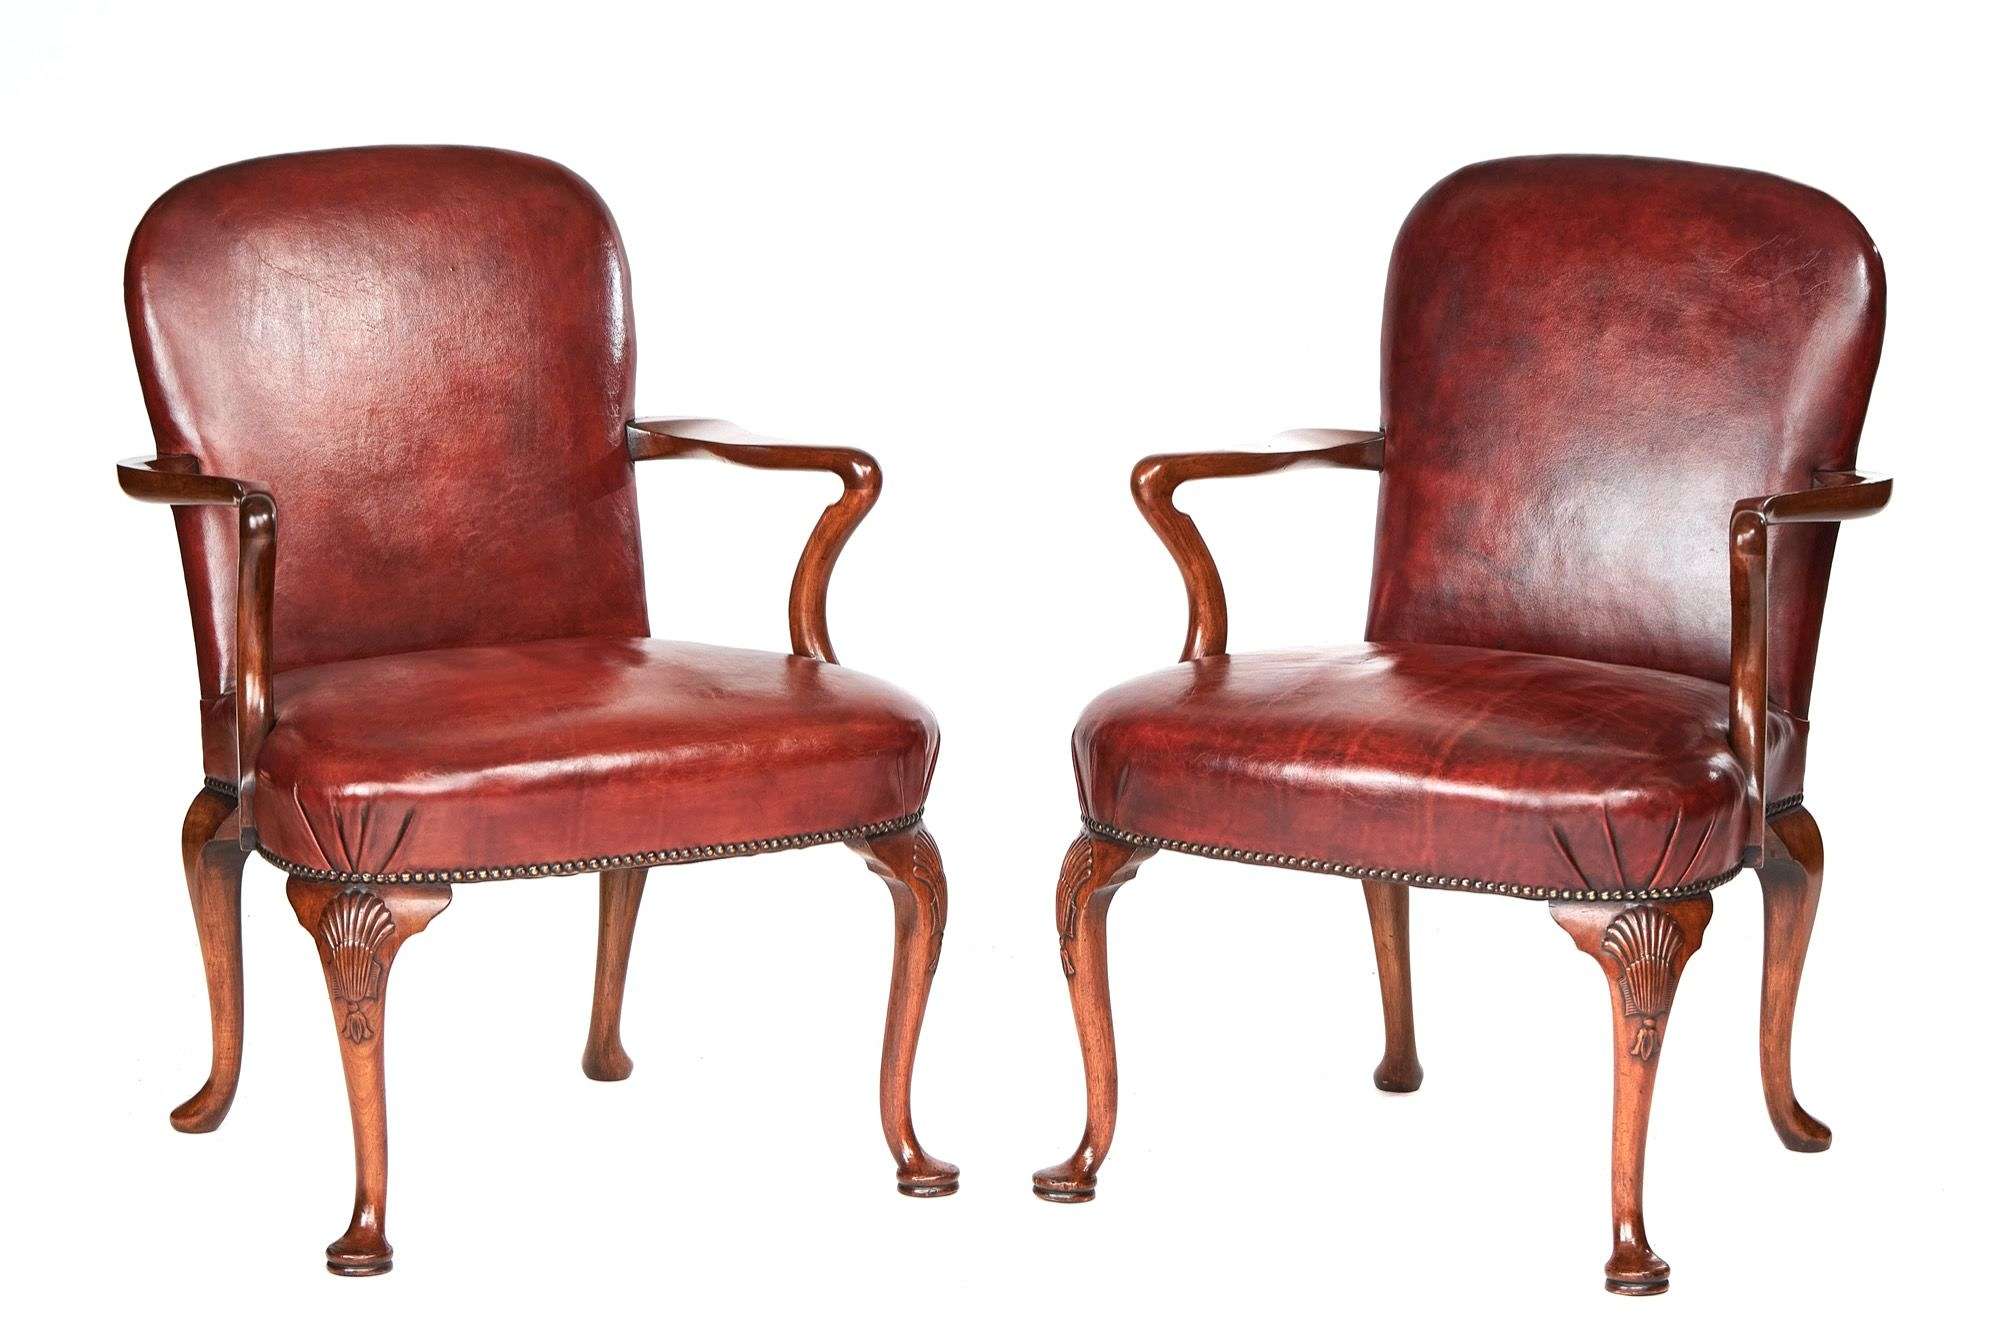 Pair Georgian Revival Walnut & Leather Open Elbow Antique Chairs Circa 1920s